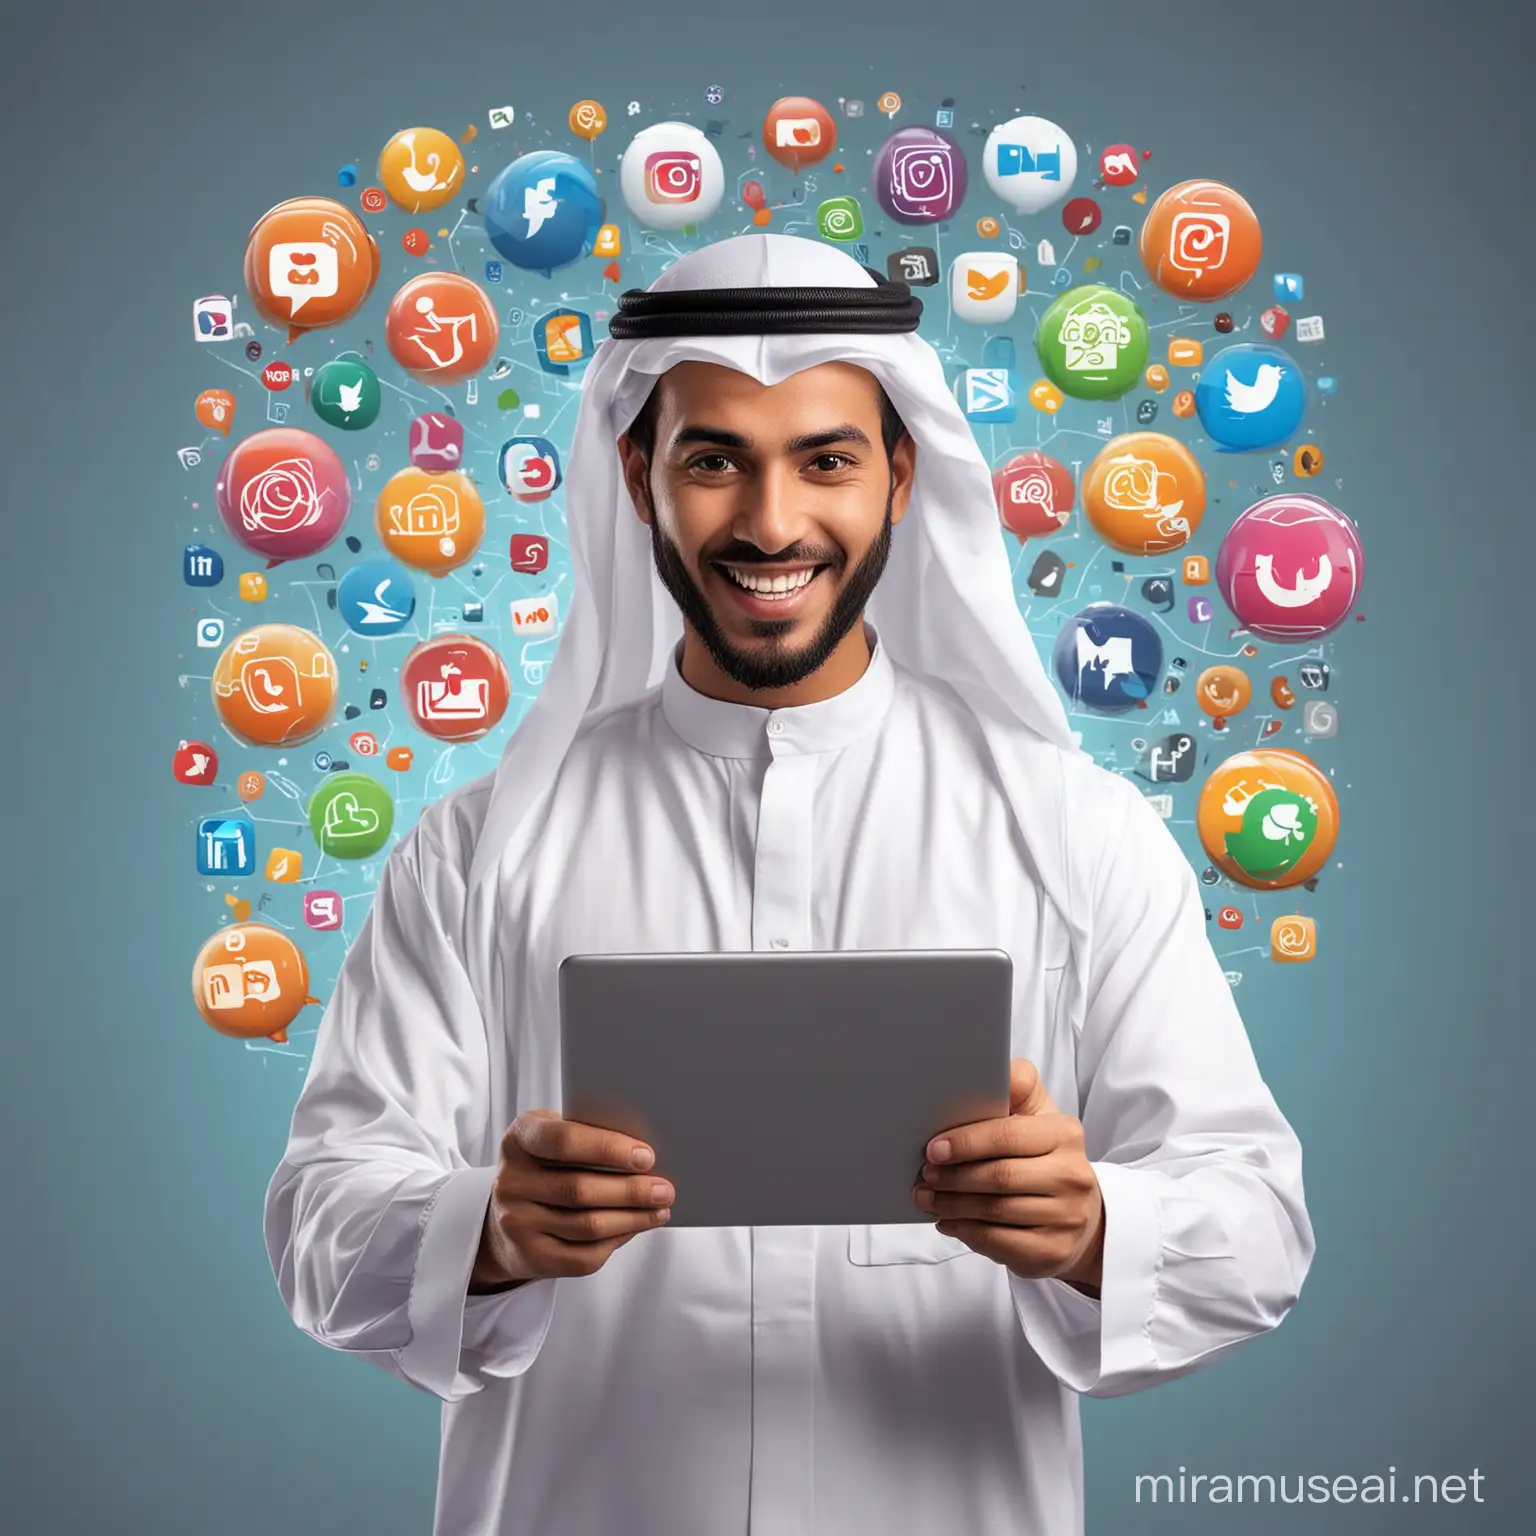 Arabic man wearing Kandora, happy expression in action pose, Behind the Arabic man show various social media icons and email, mobile and platforms interlinking,create a background that shows all aspects of a digital marketing company